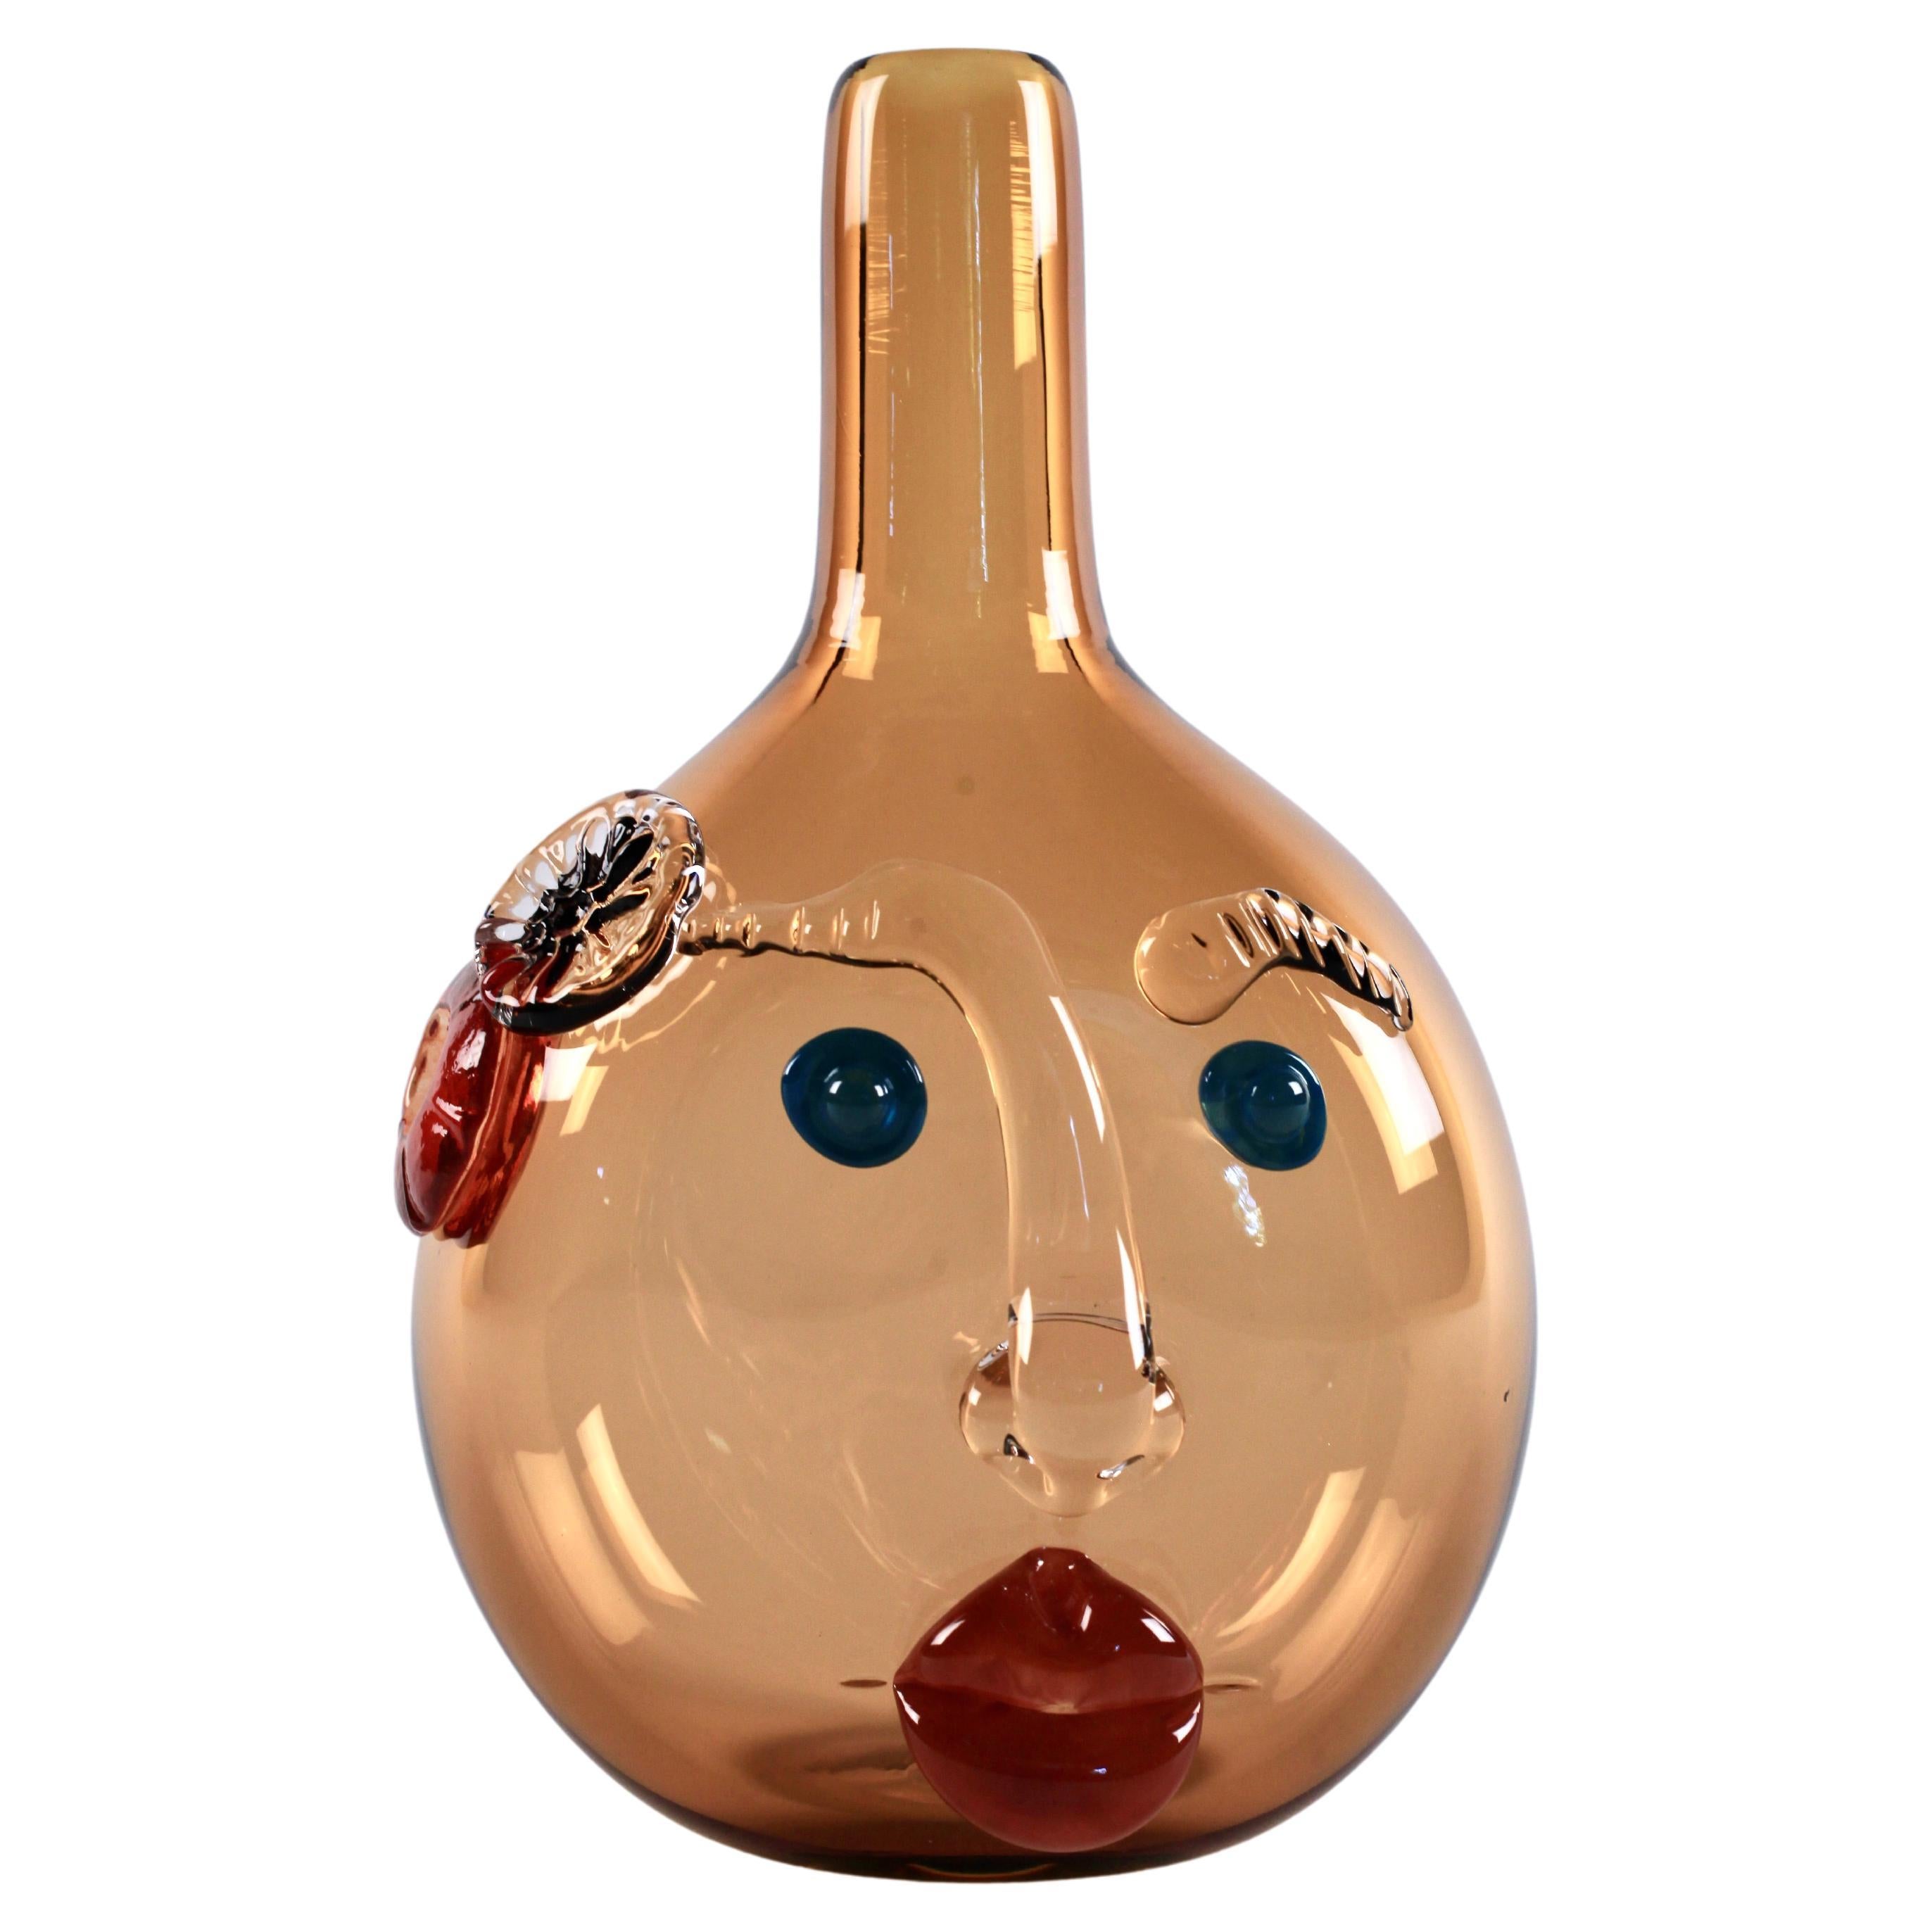 Elizabeth Lyons Hand Blown and Sculpted Glass, Amber Bottle-Head Vessel For Sale